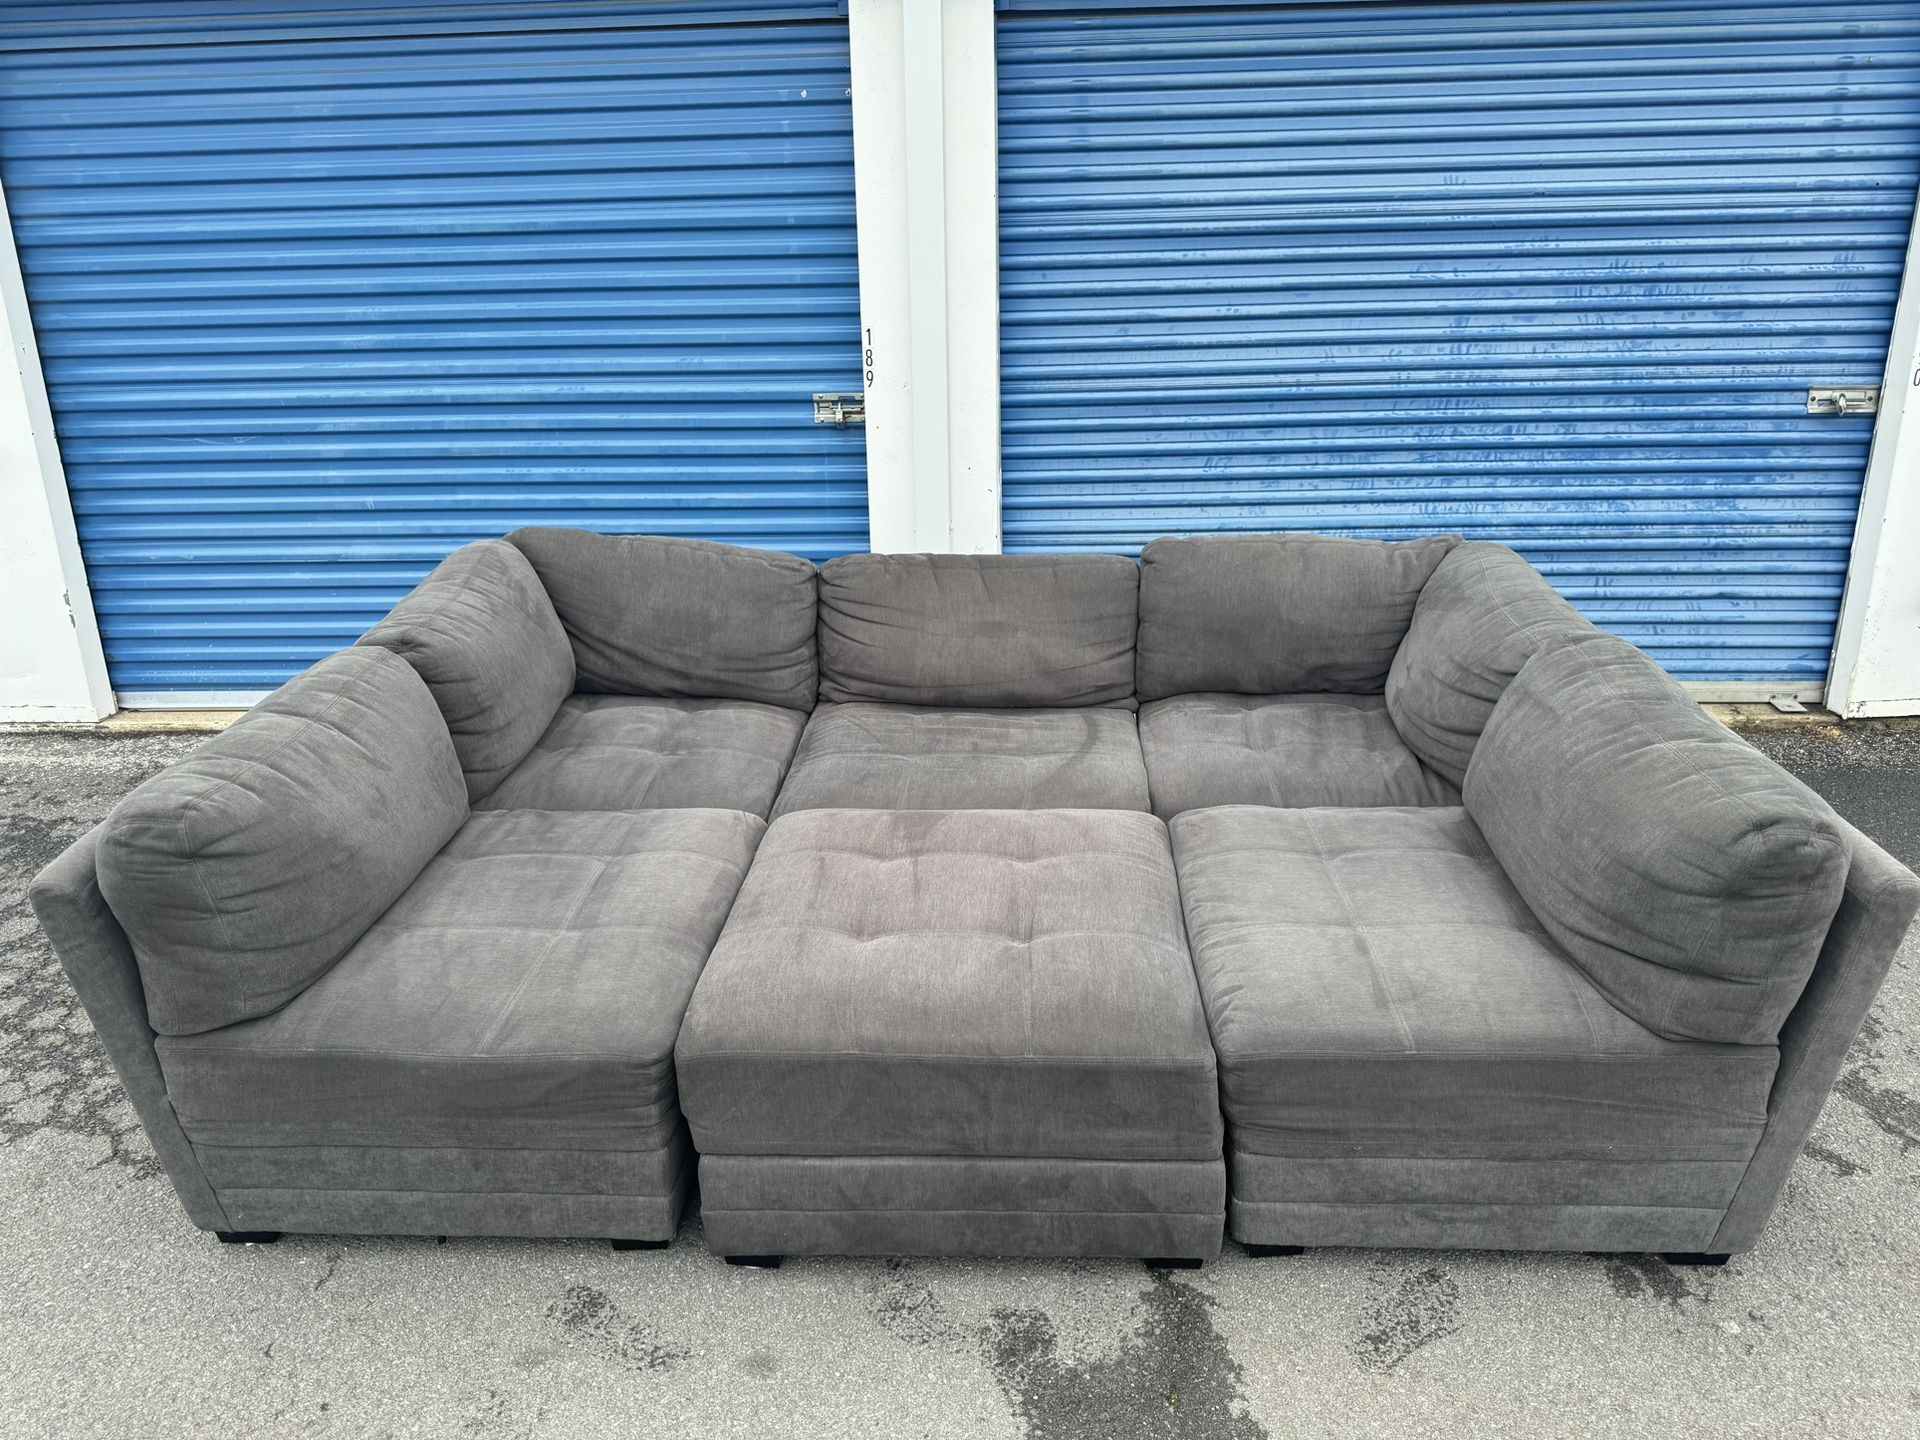 gray 6 piece modular sectional with storage ottoman FREE DELIVERY!